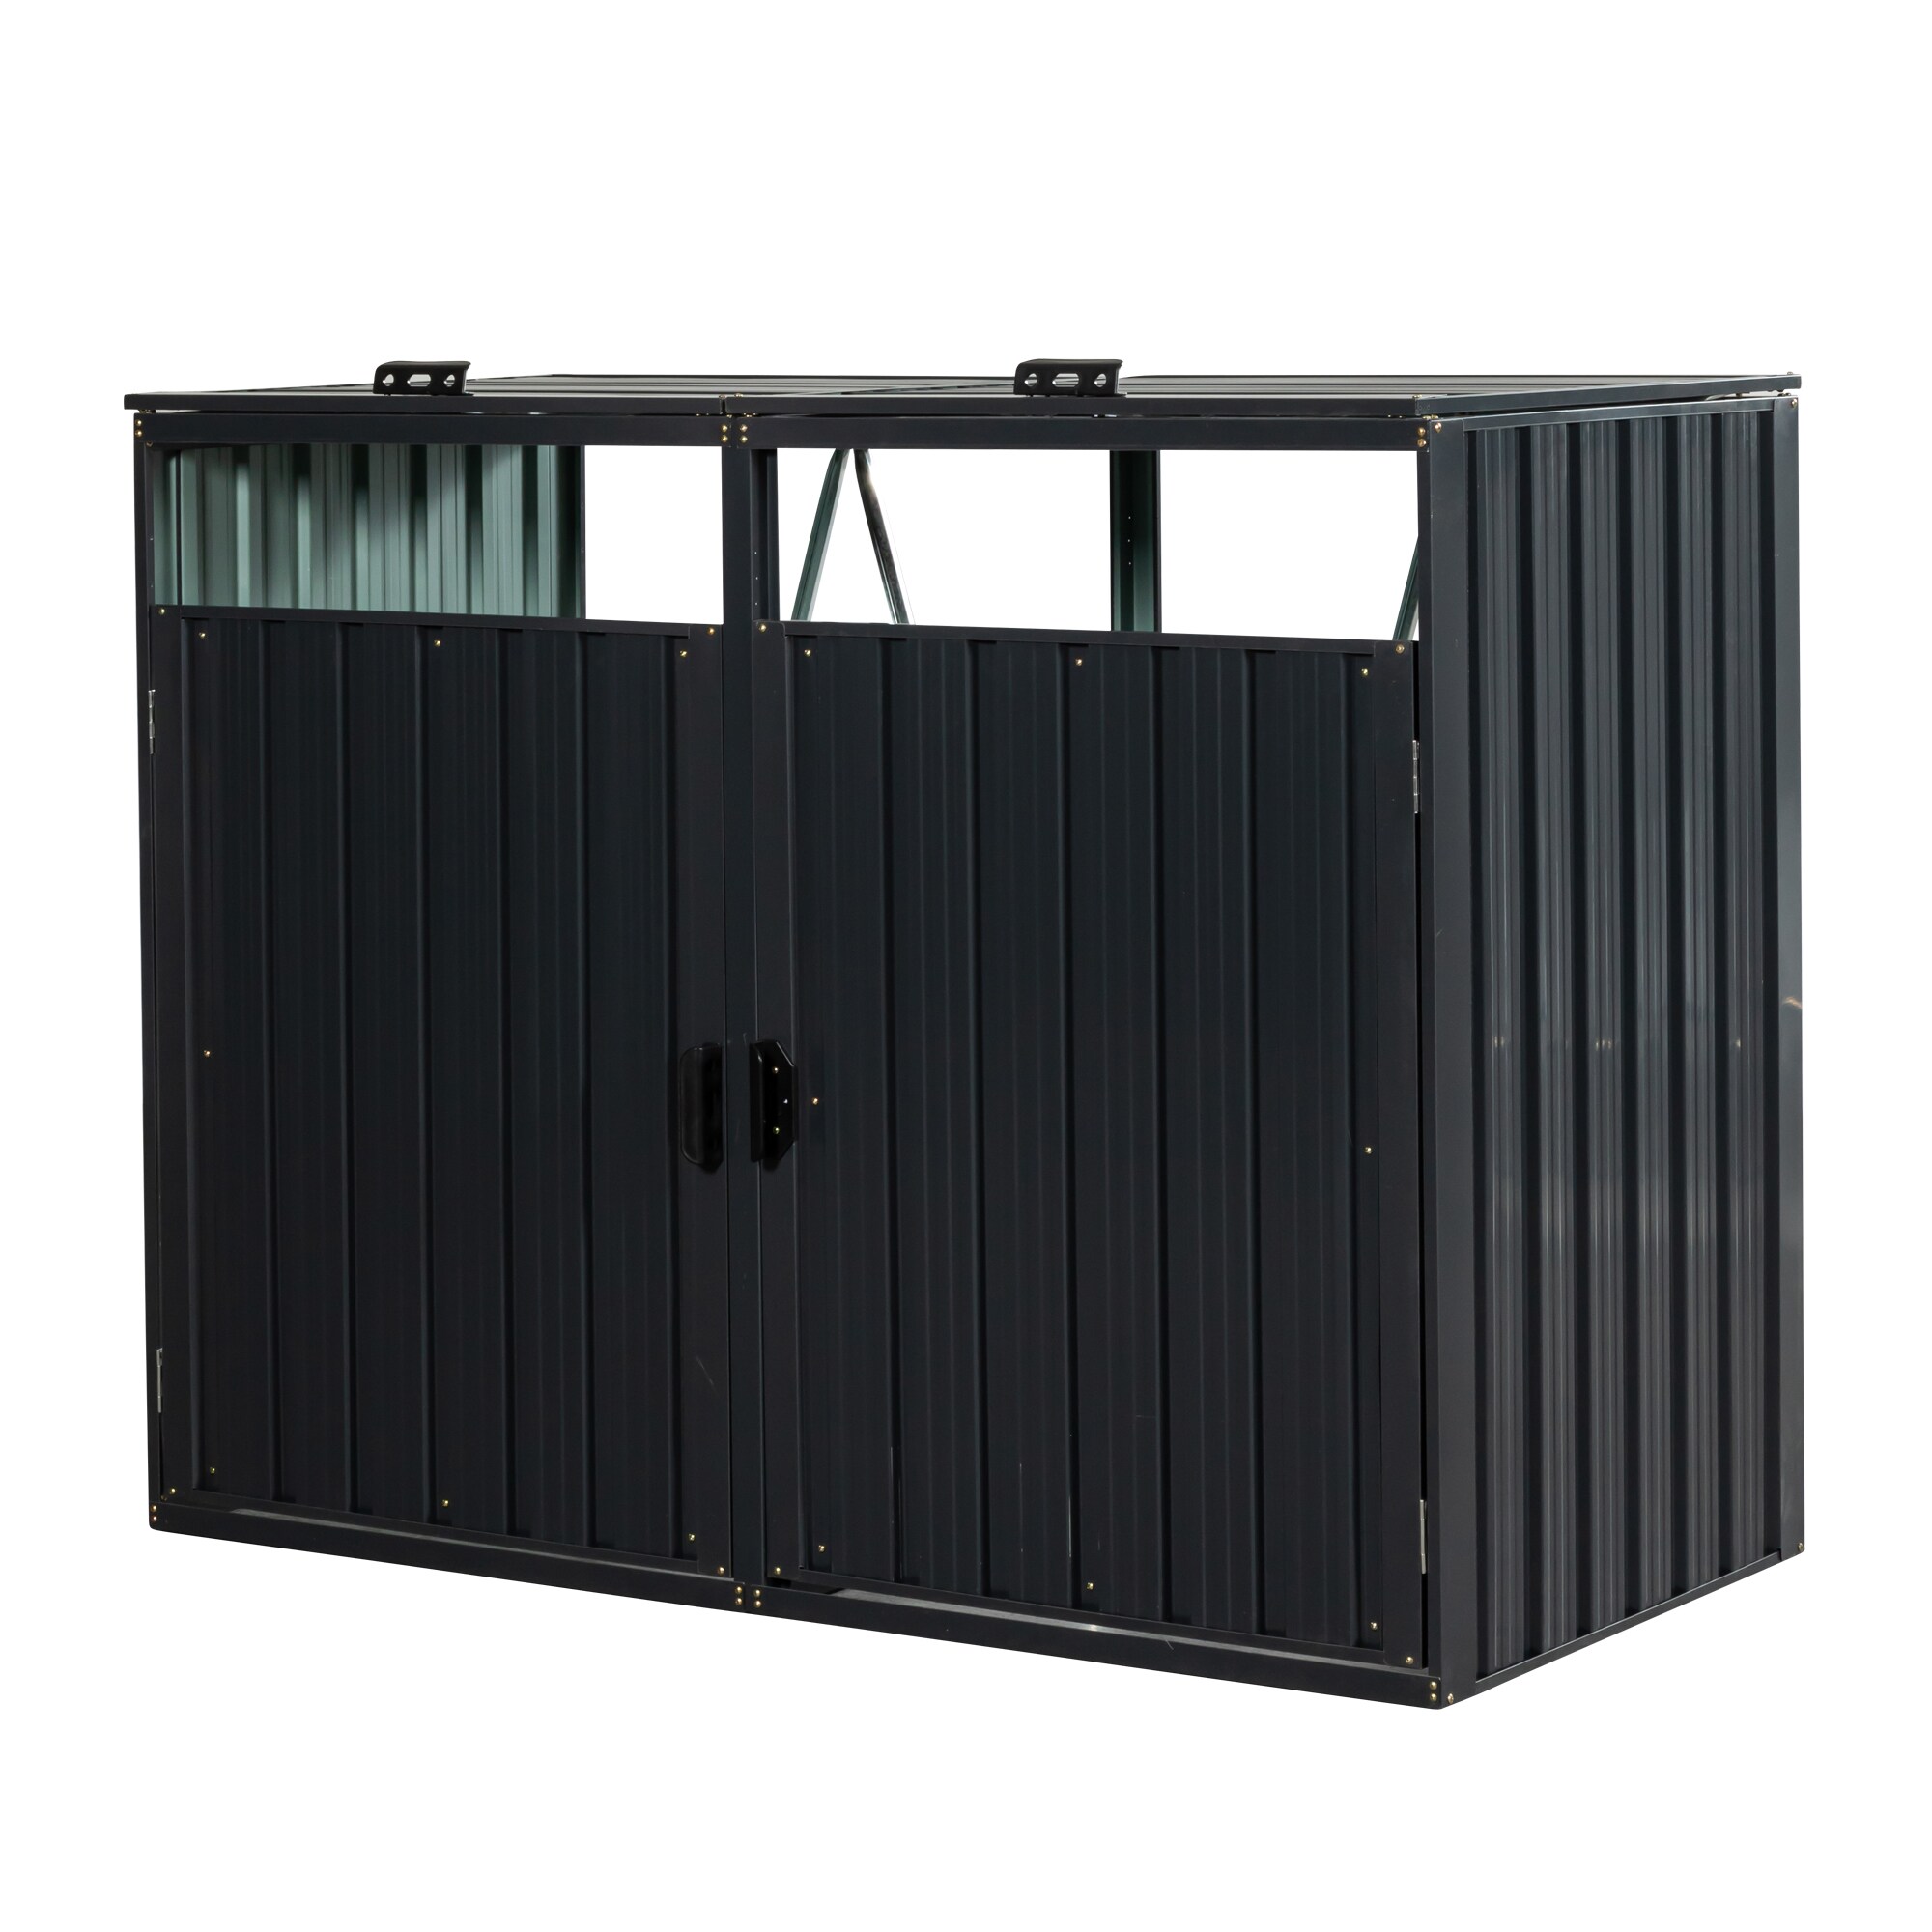 WELLFOR Off-White HDPE Outdoor Storage Shed (Common: 24-in x 46-in; Interior Dimensions: 20.5-in x 43.7-in) | KT0007AM